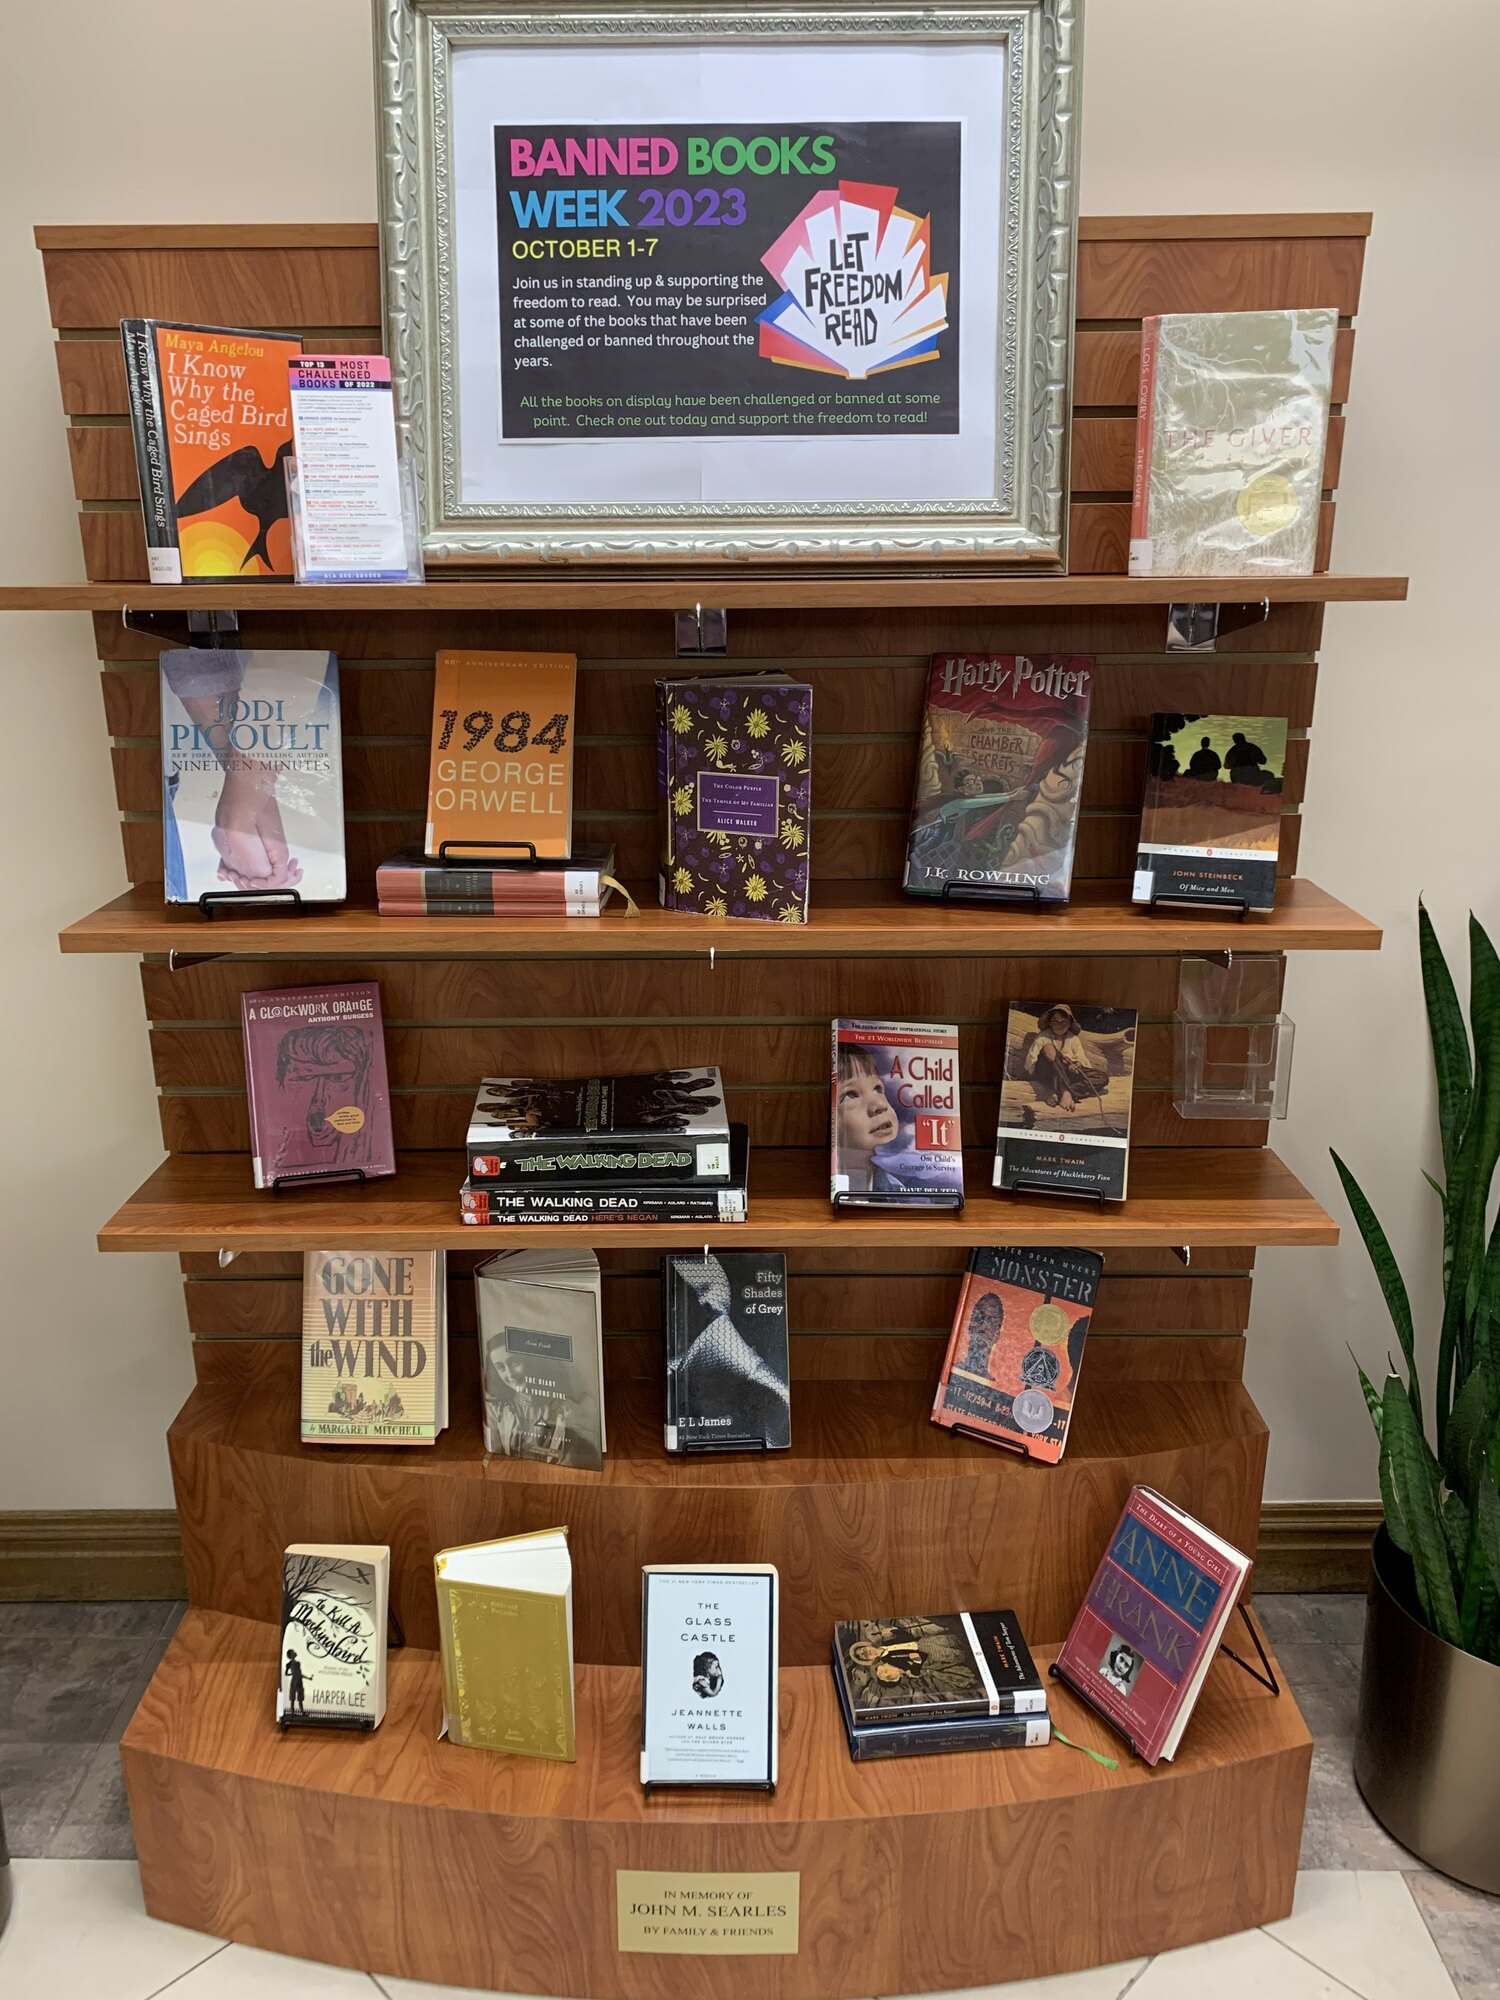 A scene from the banned books display at Hampton Bays Public Library. ALEX GIRESI